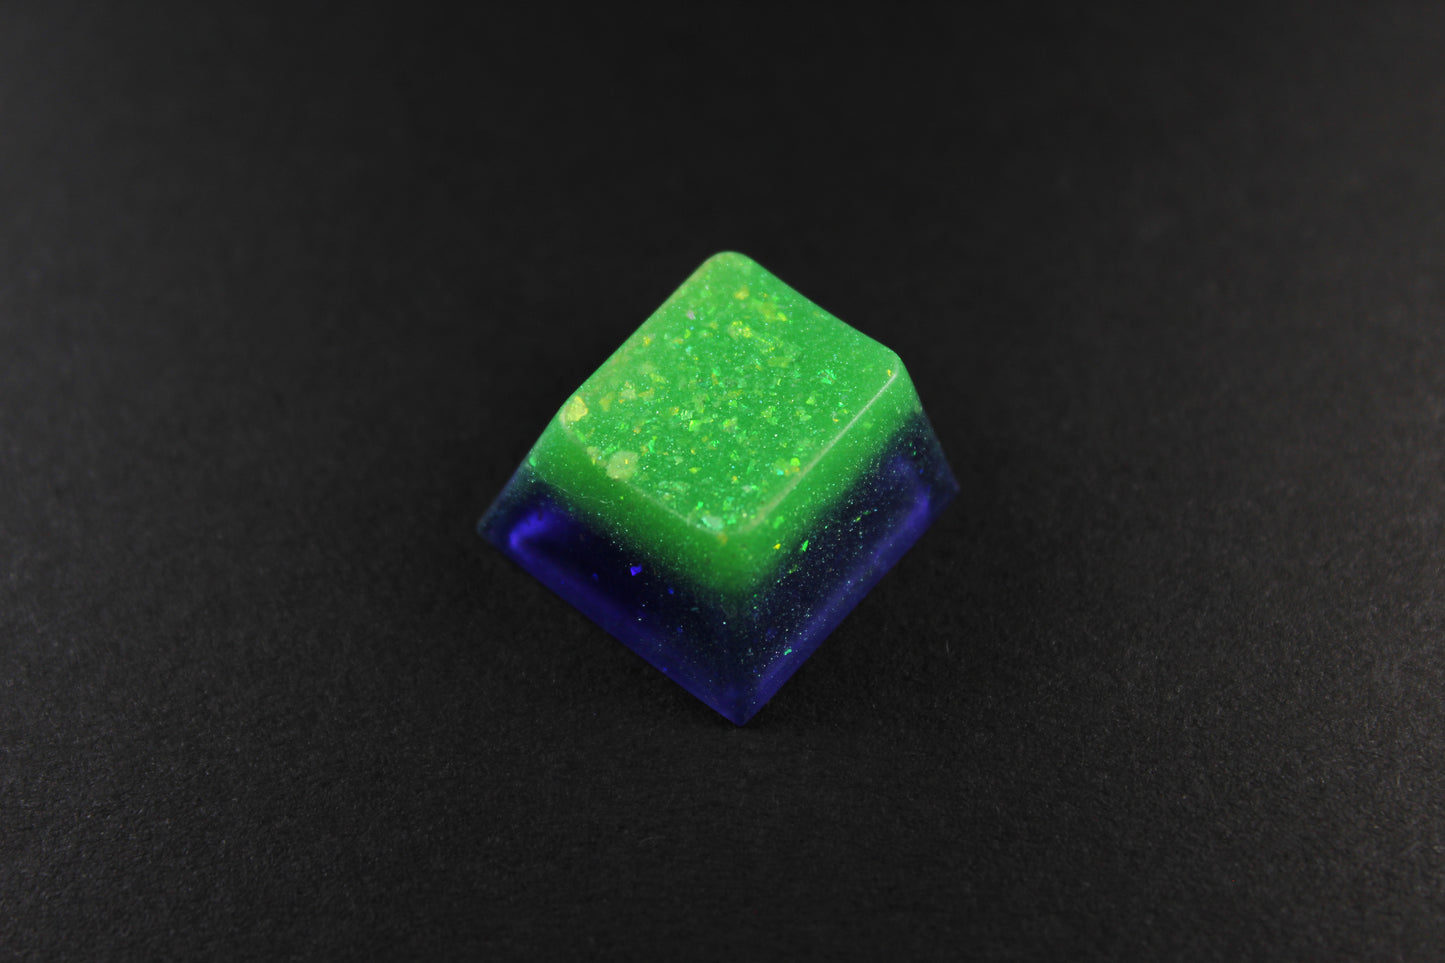 Cherry ESC - Hulkey 2 - PrimeCaps Keycap - Blank and Sculpted Artisan Keycaps for cherry MX mechanical keyboards 